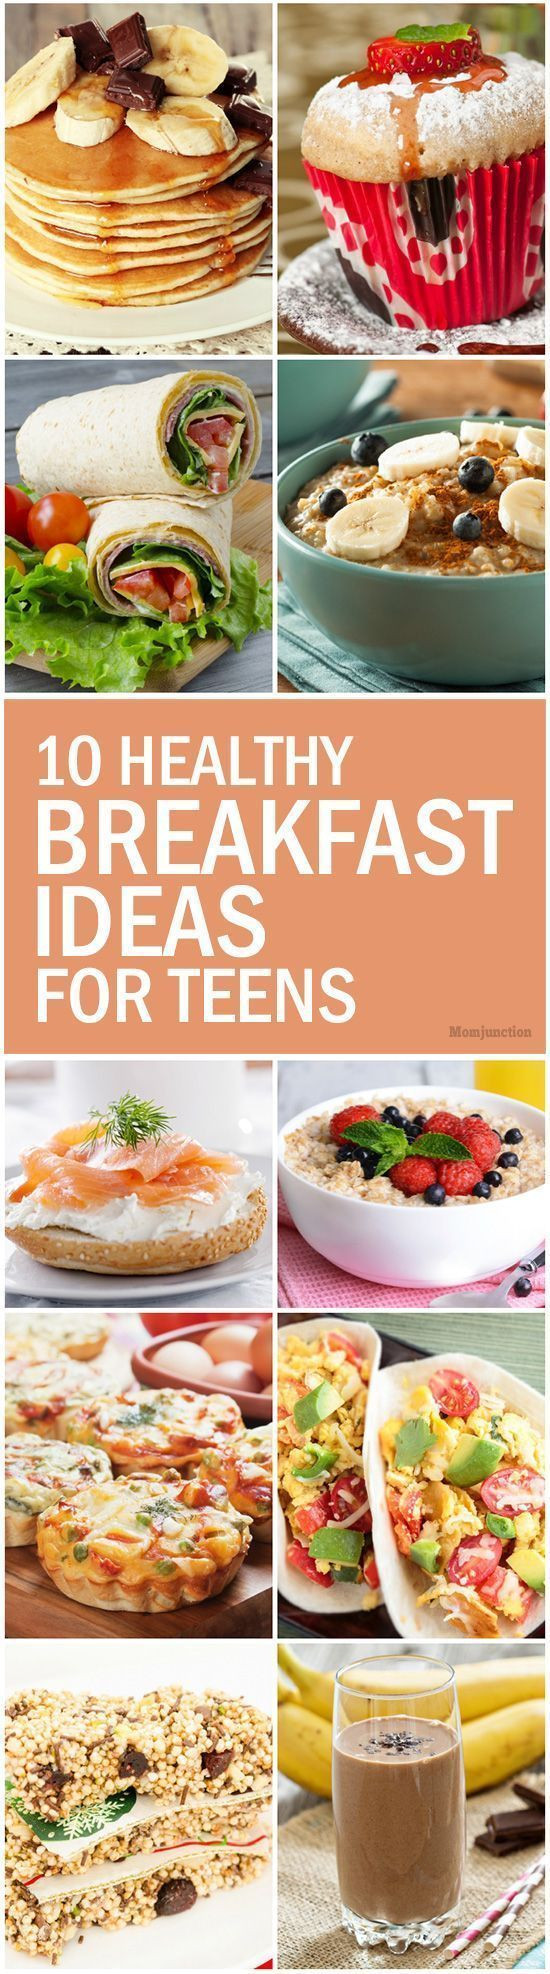 Healthy Breakfast Ideas For Teens
 1000 images about Teen Topics on Pinterest